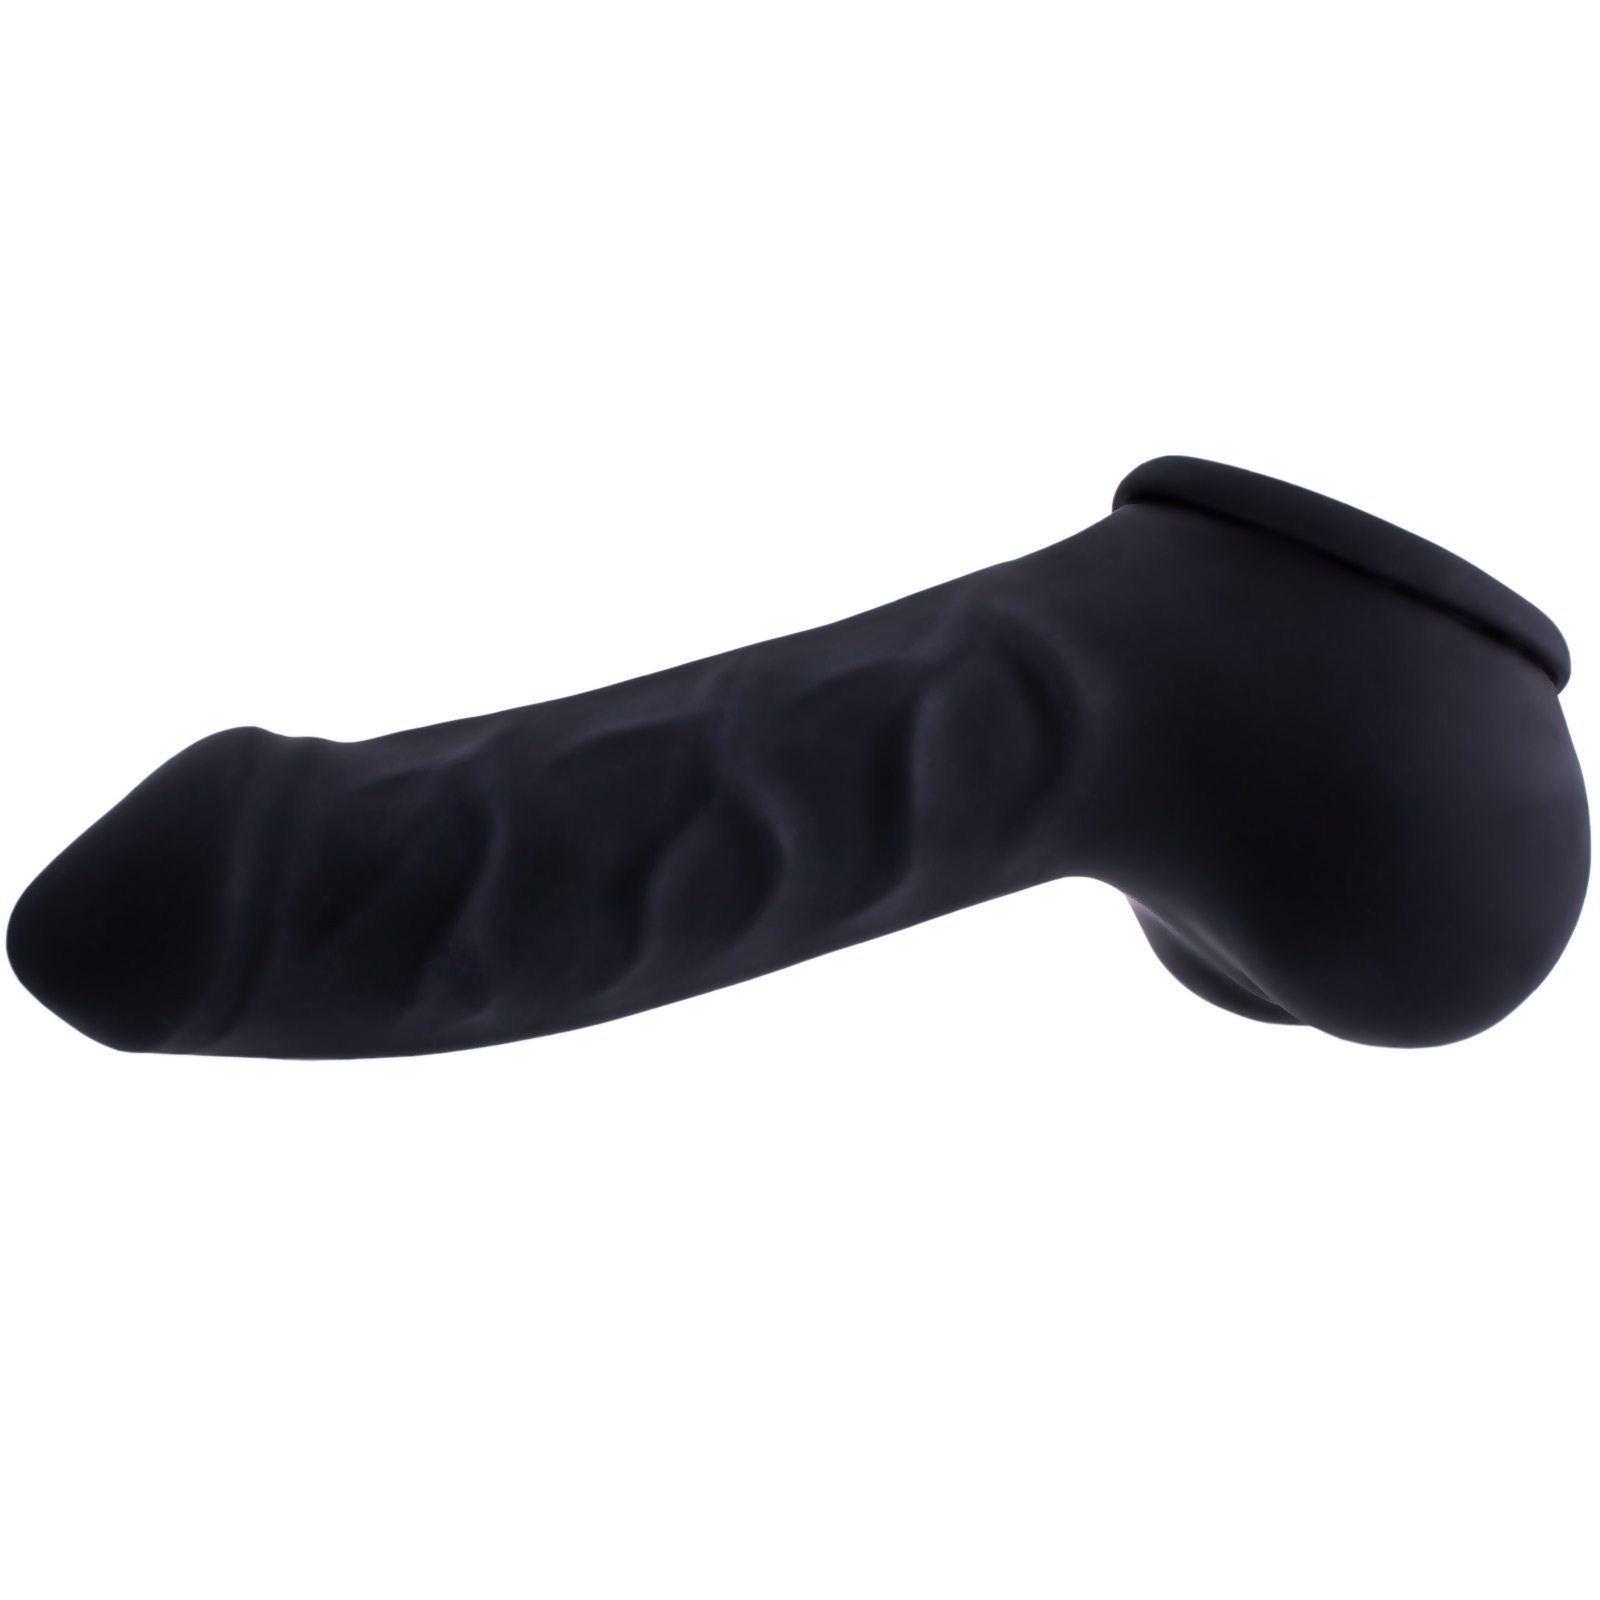 Toylie Latex Penis Sleeve «CARLOS» black, with strong veins and molded scrotum - suitable for vegans